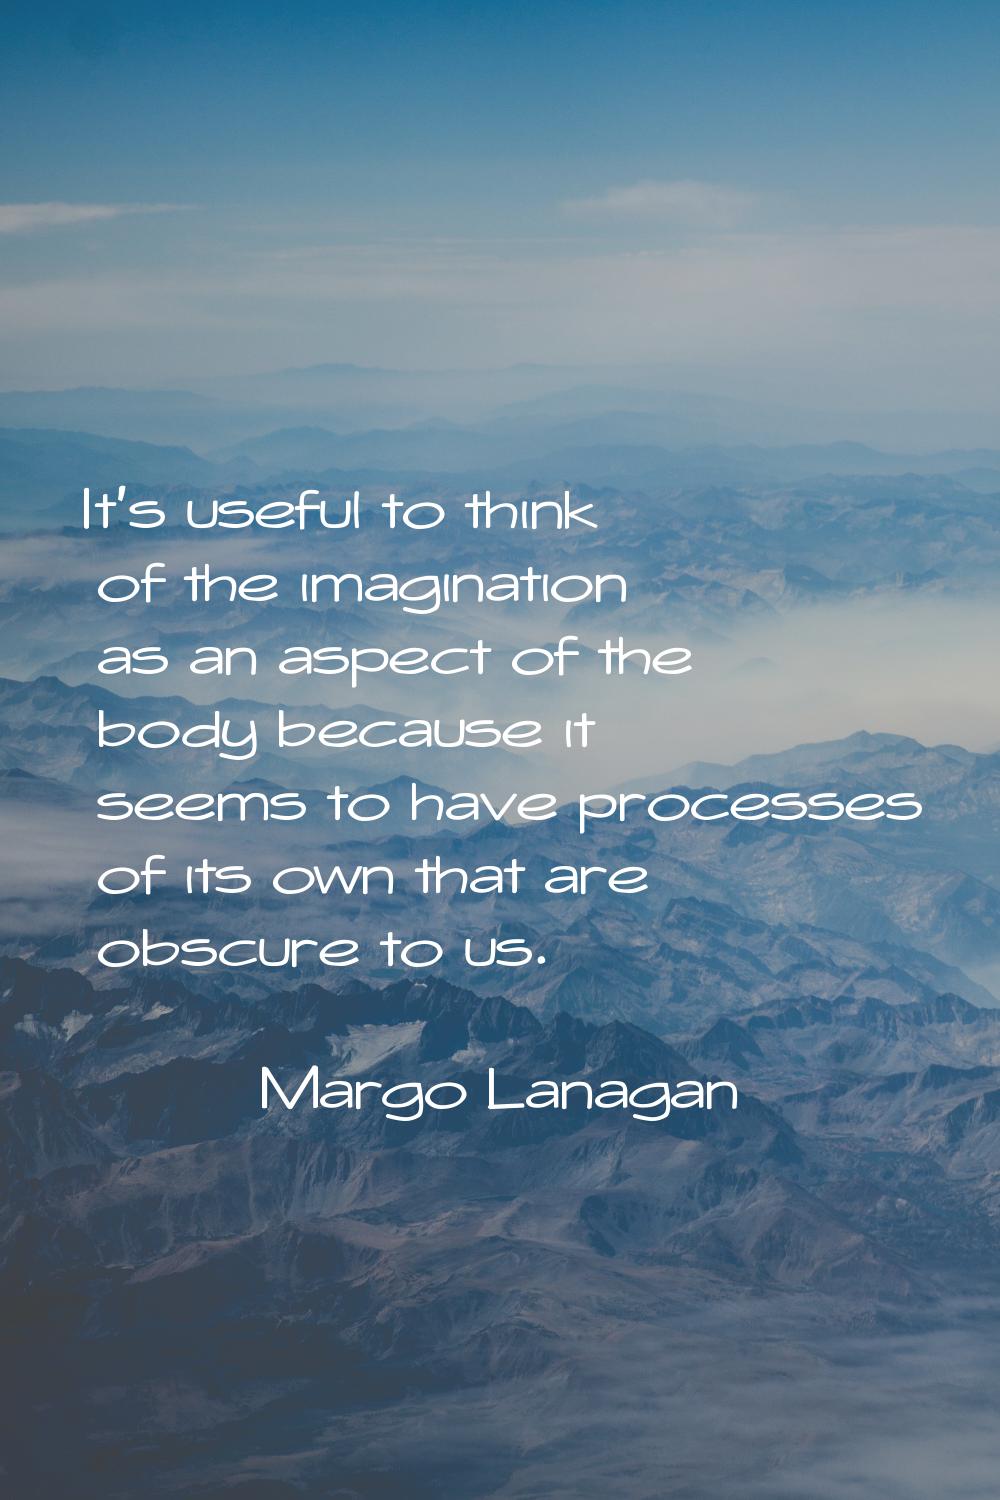 It's useful to think of the imagination as an aspect of the body because it seems to have processes